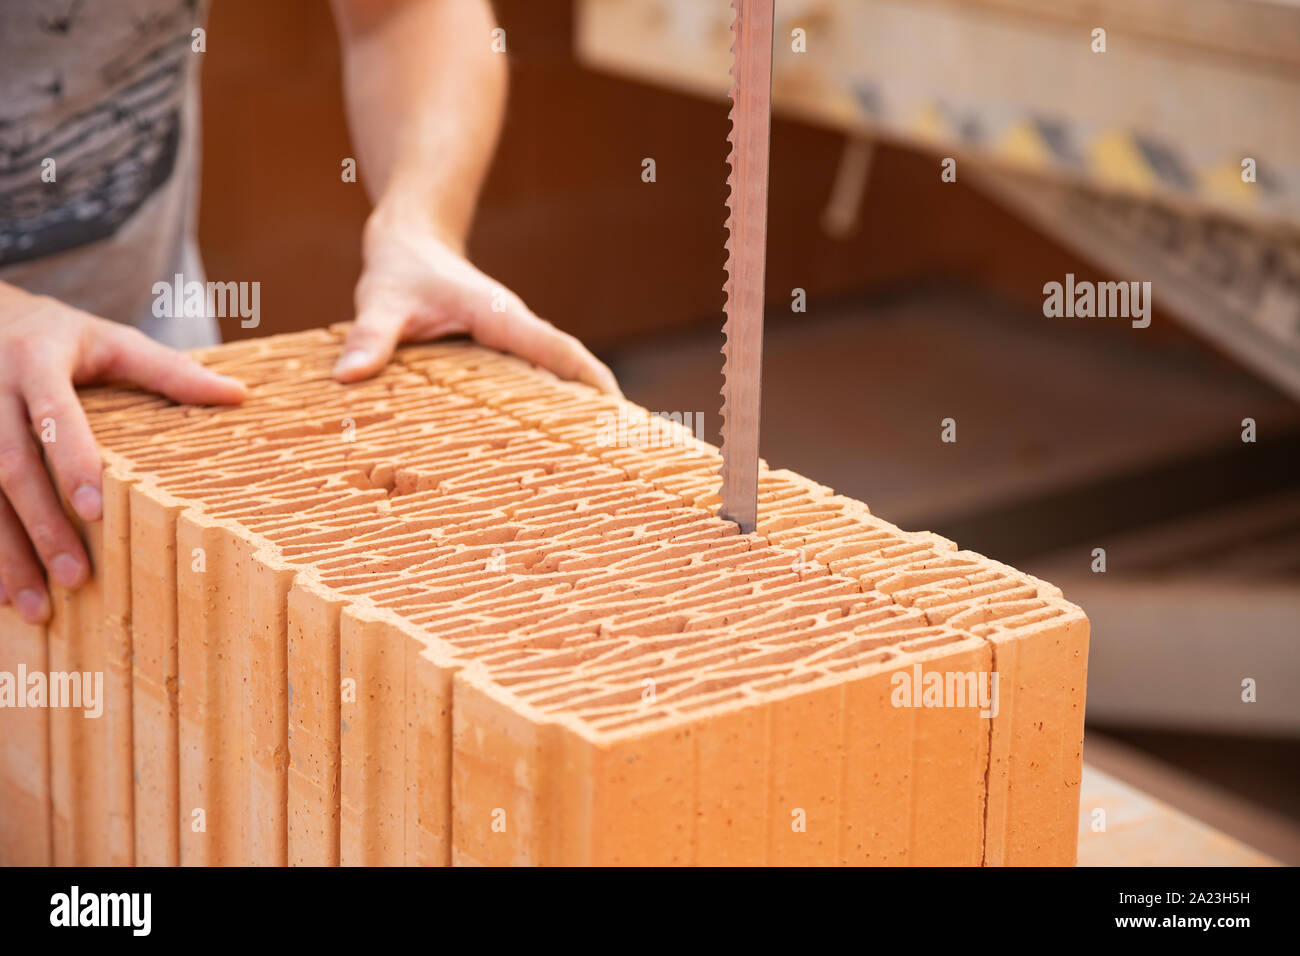 Bricklayer is cutting a brick with an electrical saw Stock Photo